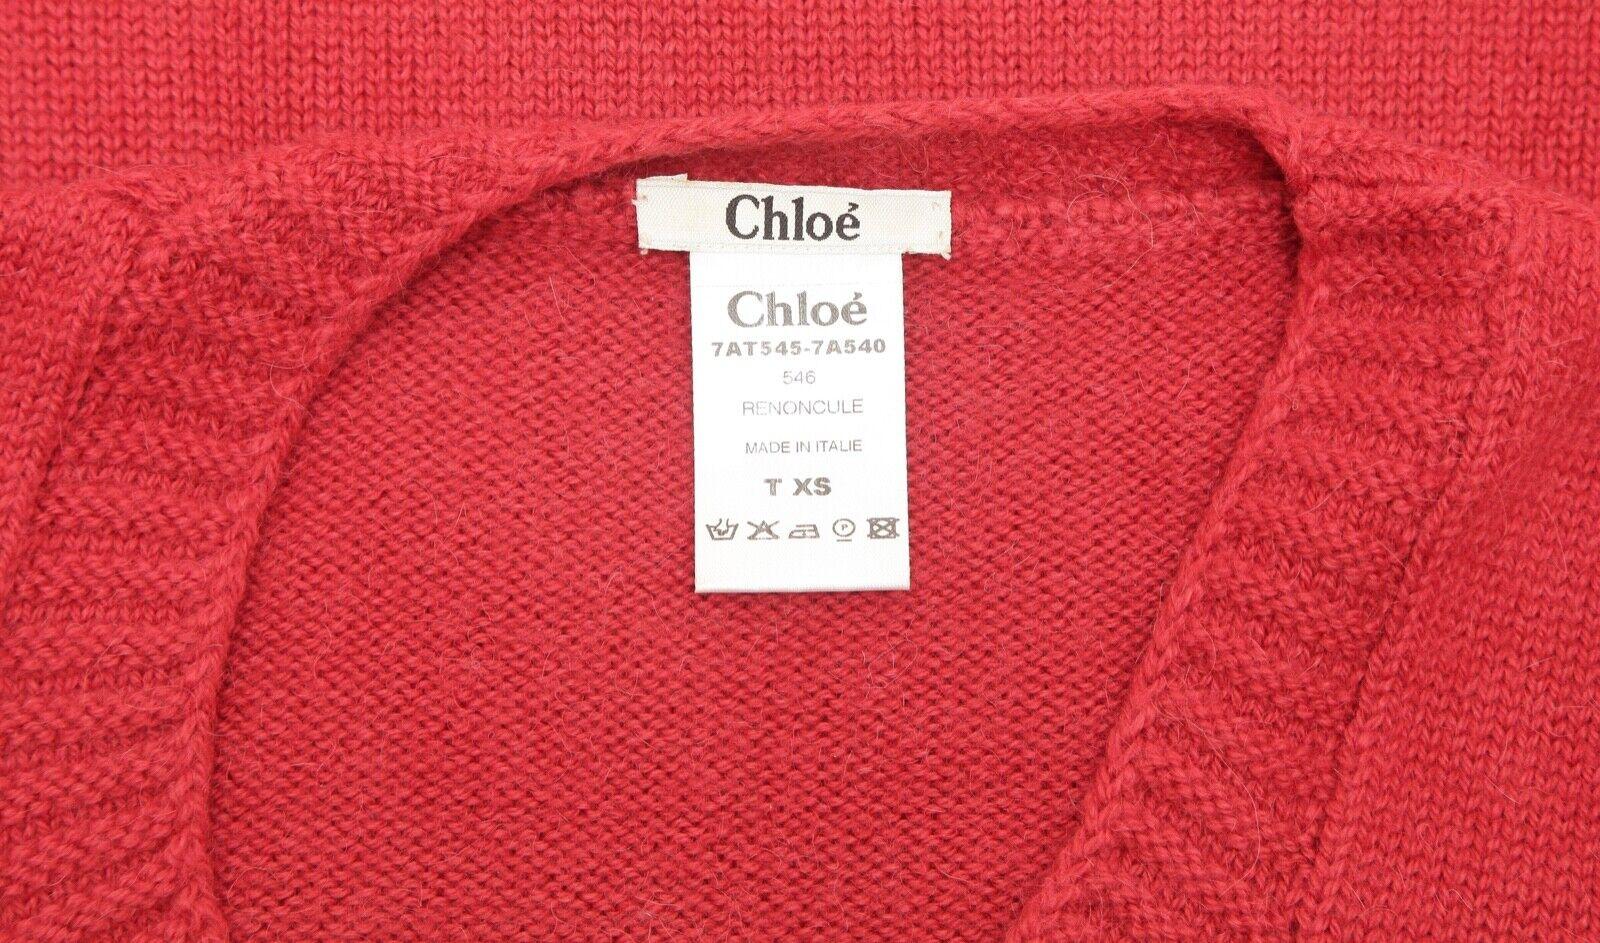 CHLOE Sweater Knit Top Shirt Long Sleeve Red Alpaca Scoop Neck Sz XS For Sale 4